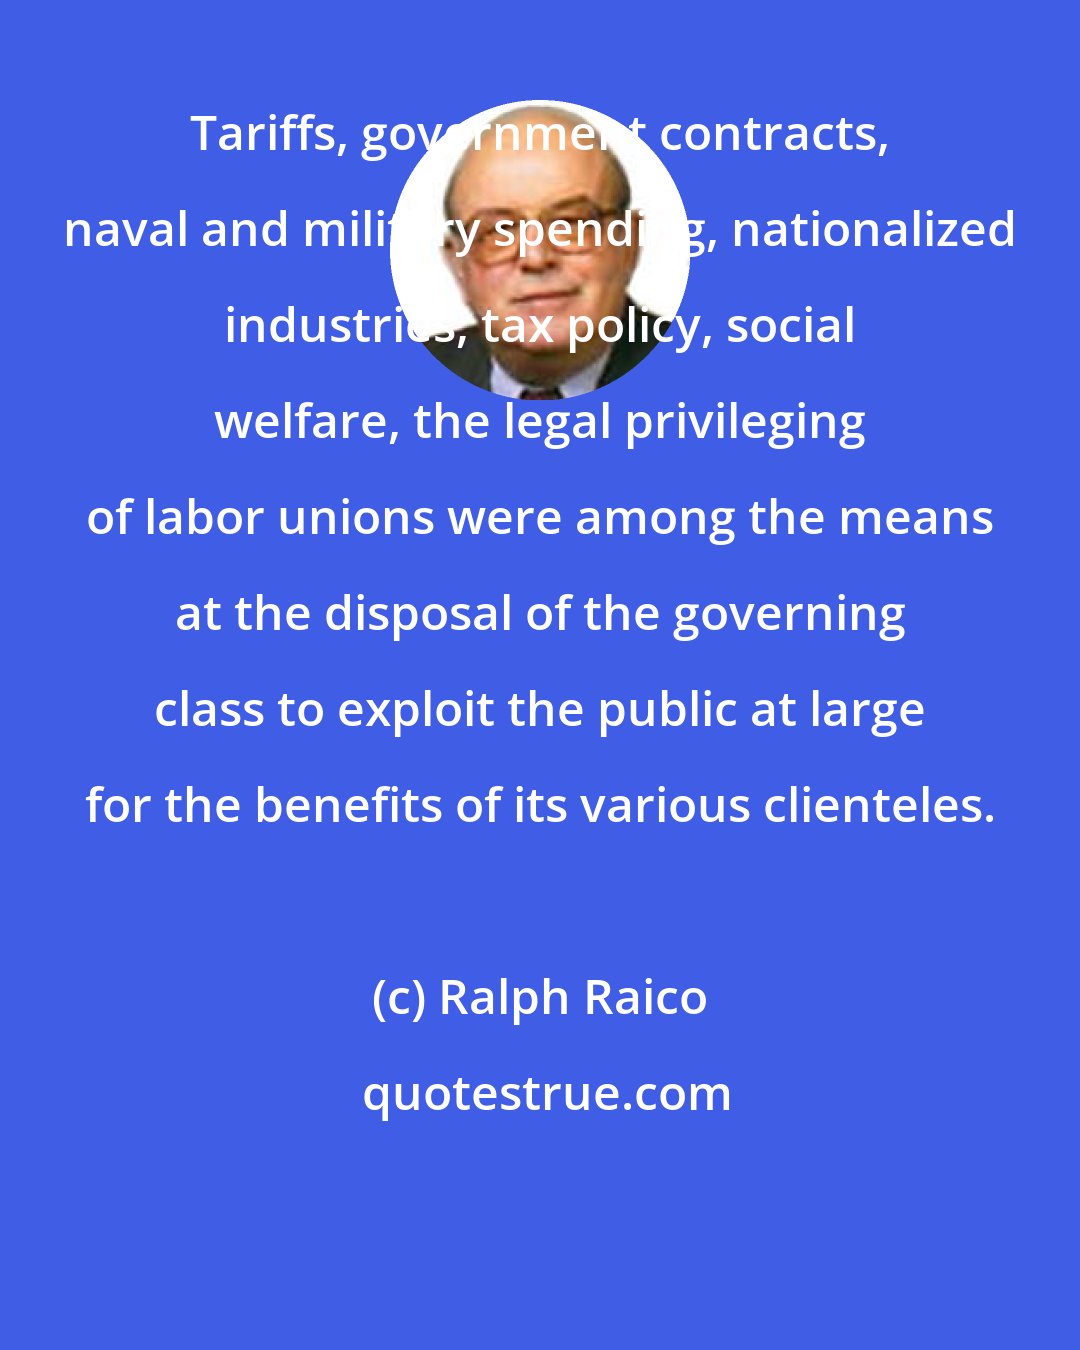 Ralph Raico: Tariffs, government contracts, naval and military spending, nationalized industries, tax policy, social welfare, the legal privileging of labor unions were among the means at the disposal of the governing class to exploit the public at large for the benefits of its various clienteles.